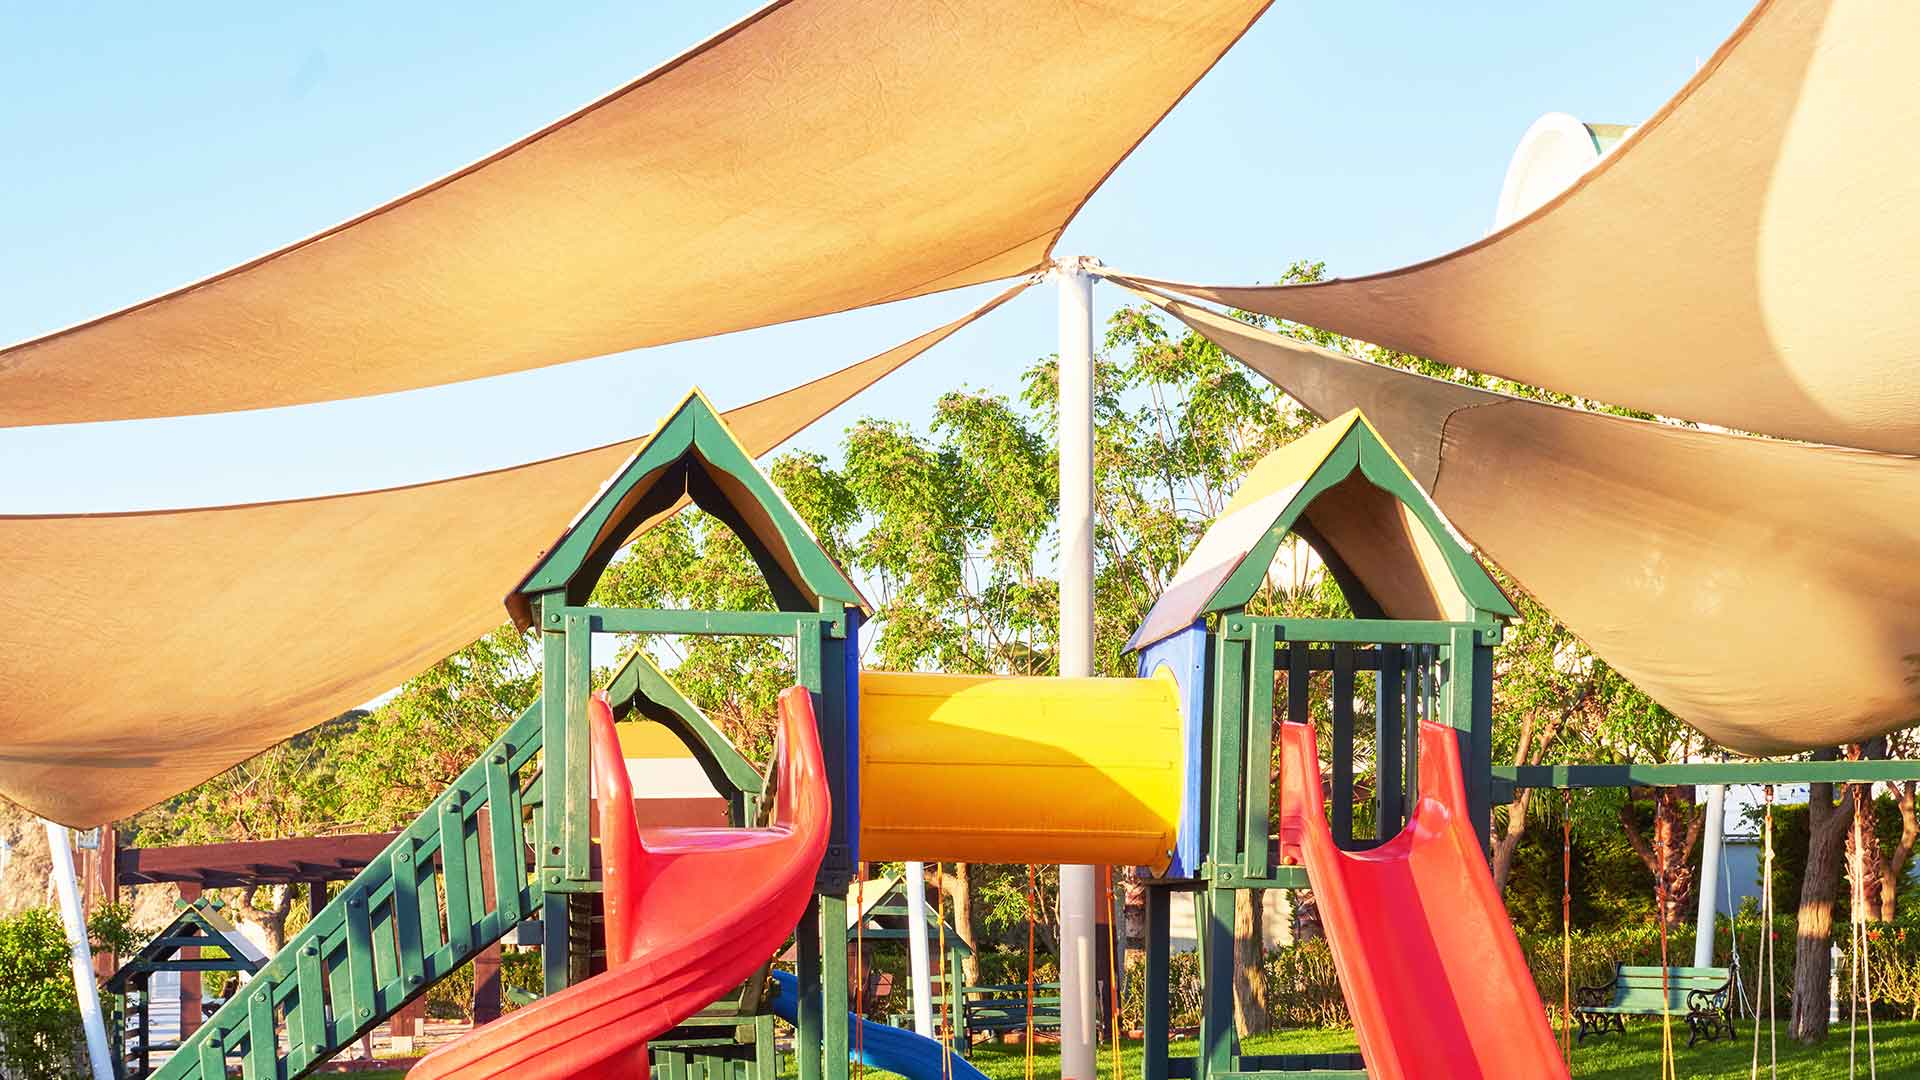 Keeping Your Child Safe In Public Playgrounds